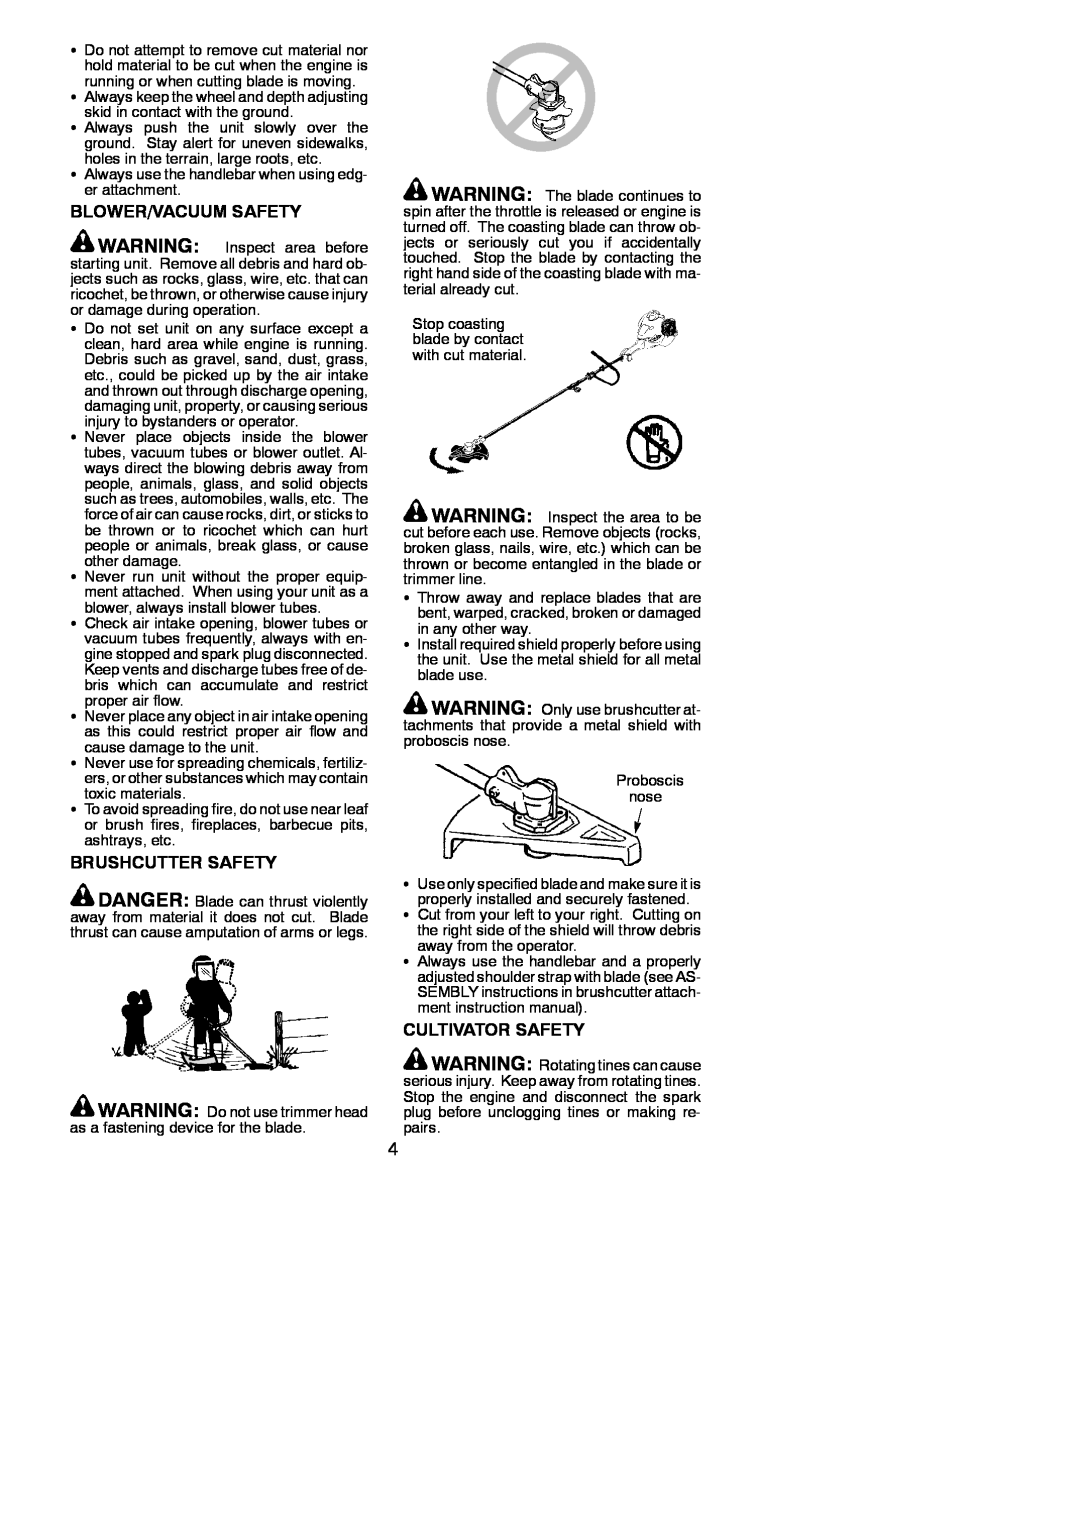 Poulan 545137276 instruction manual Blower/Vacuum Safety, Brushcutter Safety, Cultivator Safety 